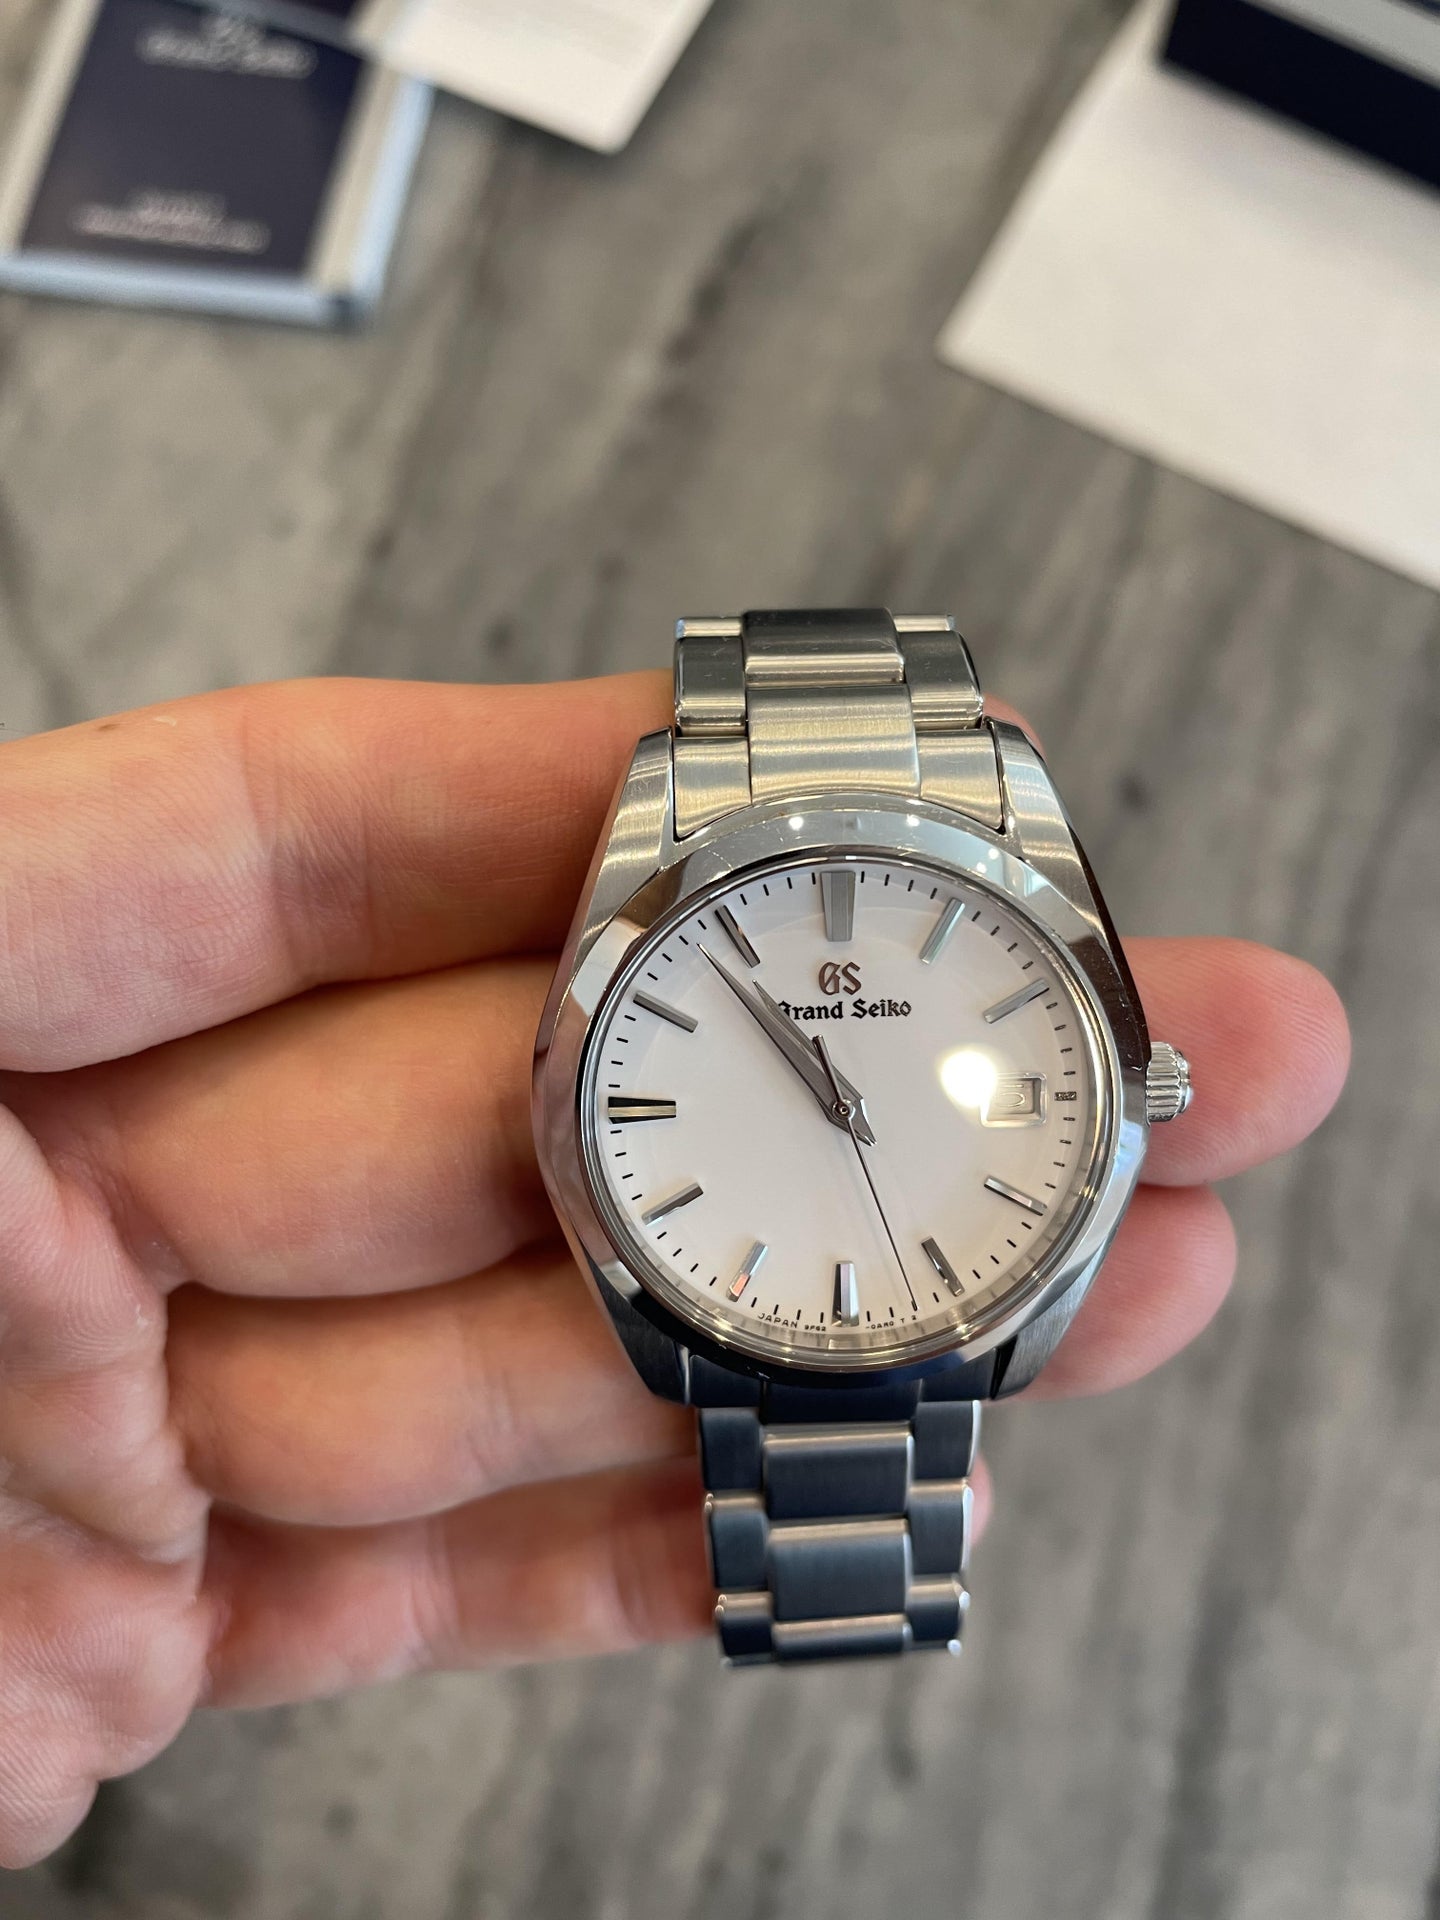 SOLD: Grand Seiko SBGX259 quartz / white dial - beautiful watch in  excellent condition | WatchUSeek Watch Forums